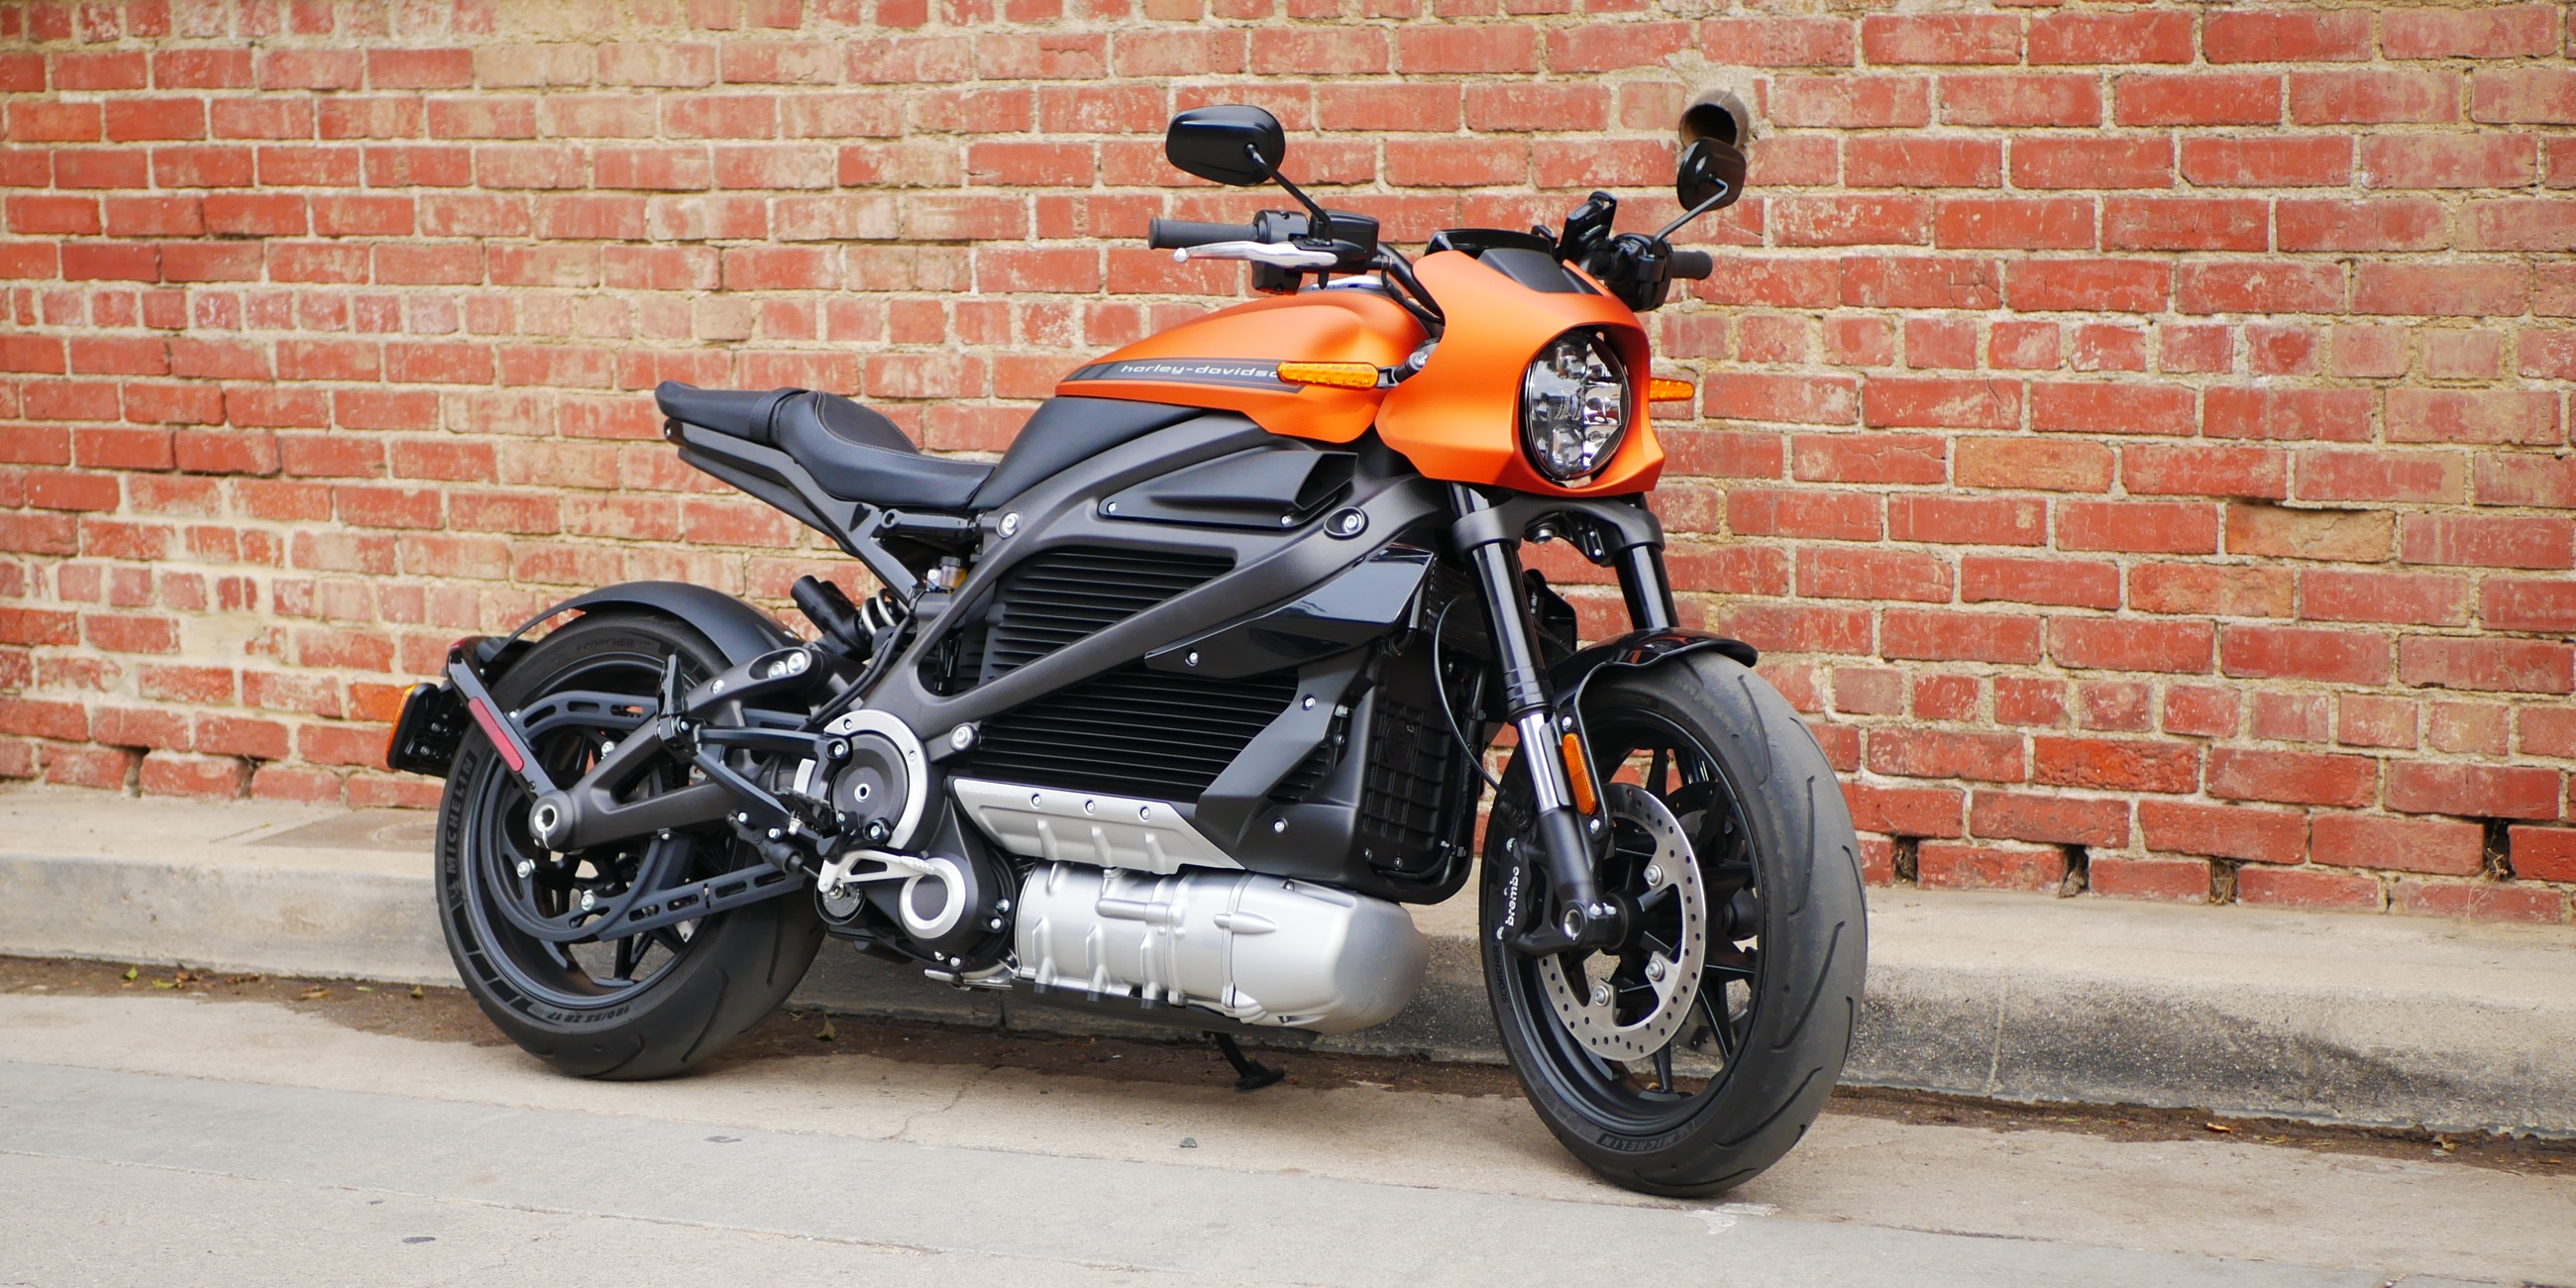 Statistical representative candidate Harley-Davidson LiveWire electric motorcycle review: The real deal